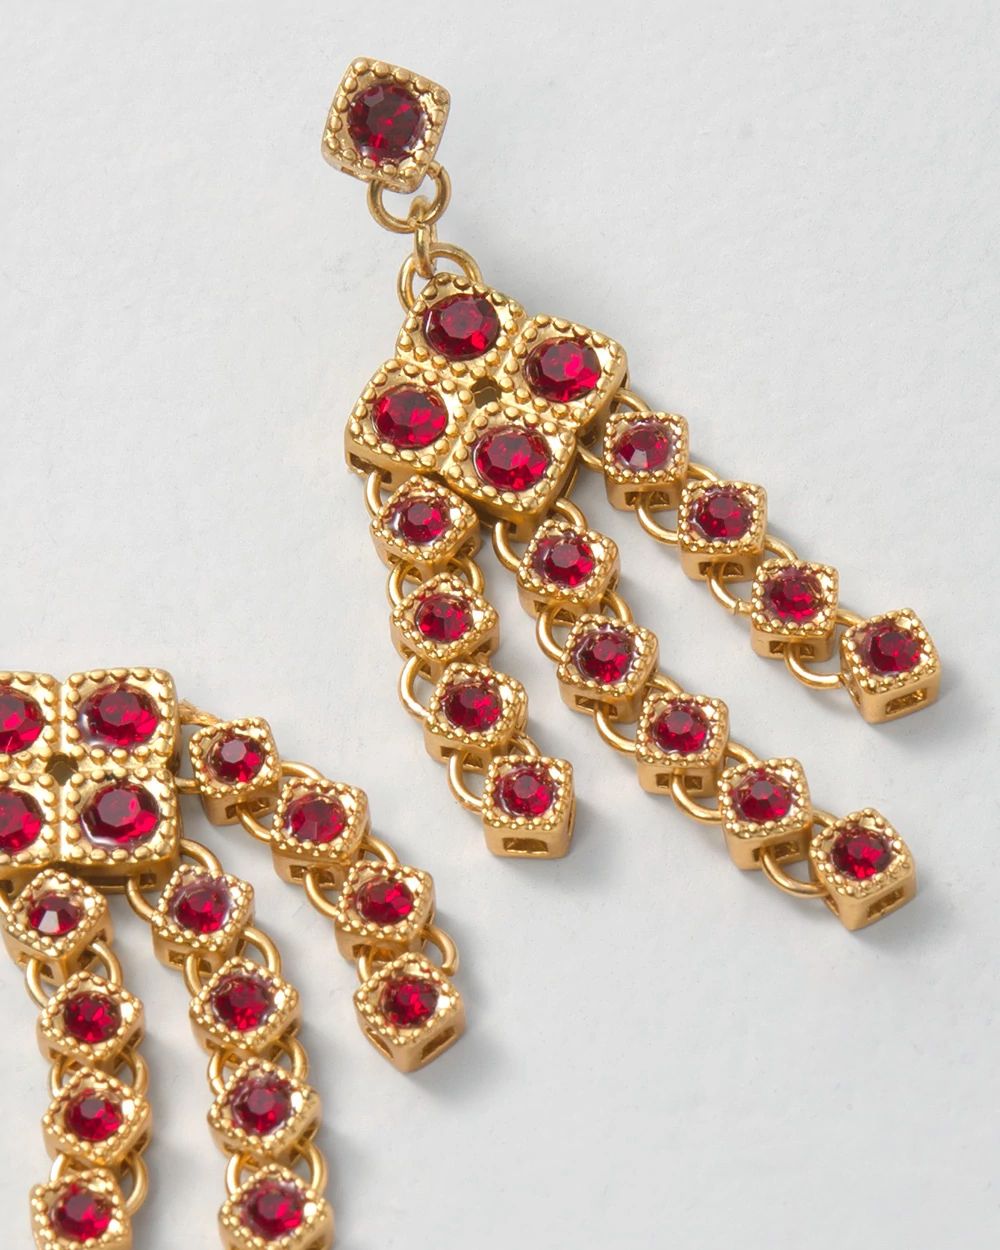 Red & Gold Chandelier Earrings click to view larger image.